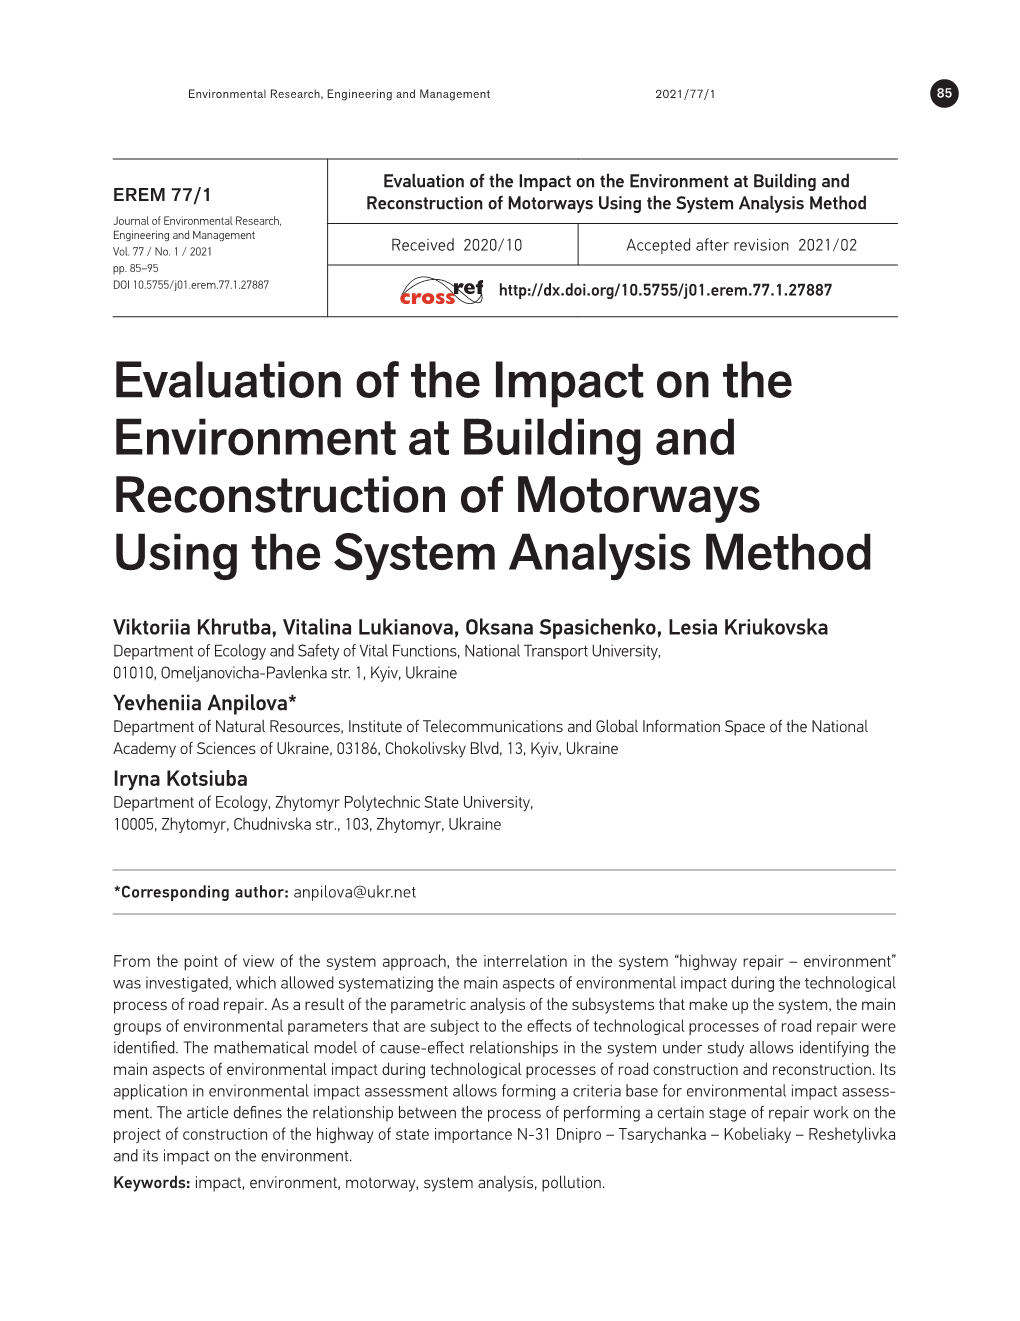 Evaluation of the Impact on the Environment at Building and Reconstruction of Motorways Using the System Analysis Method